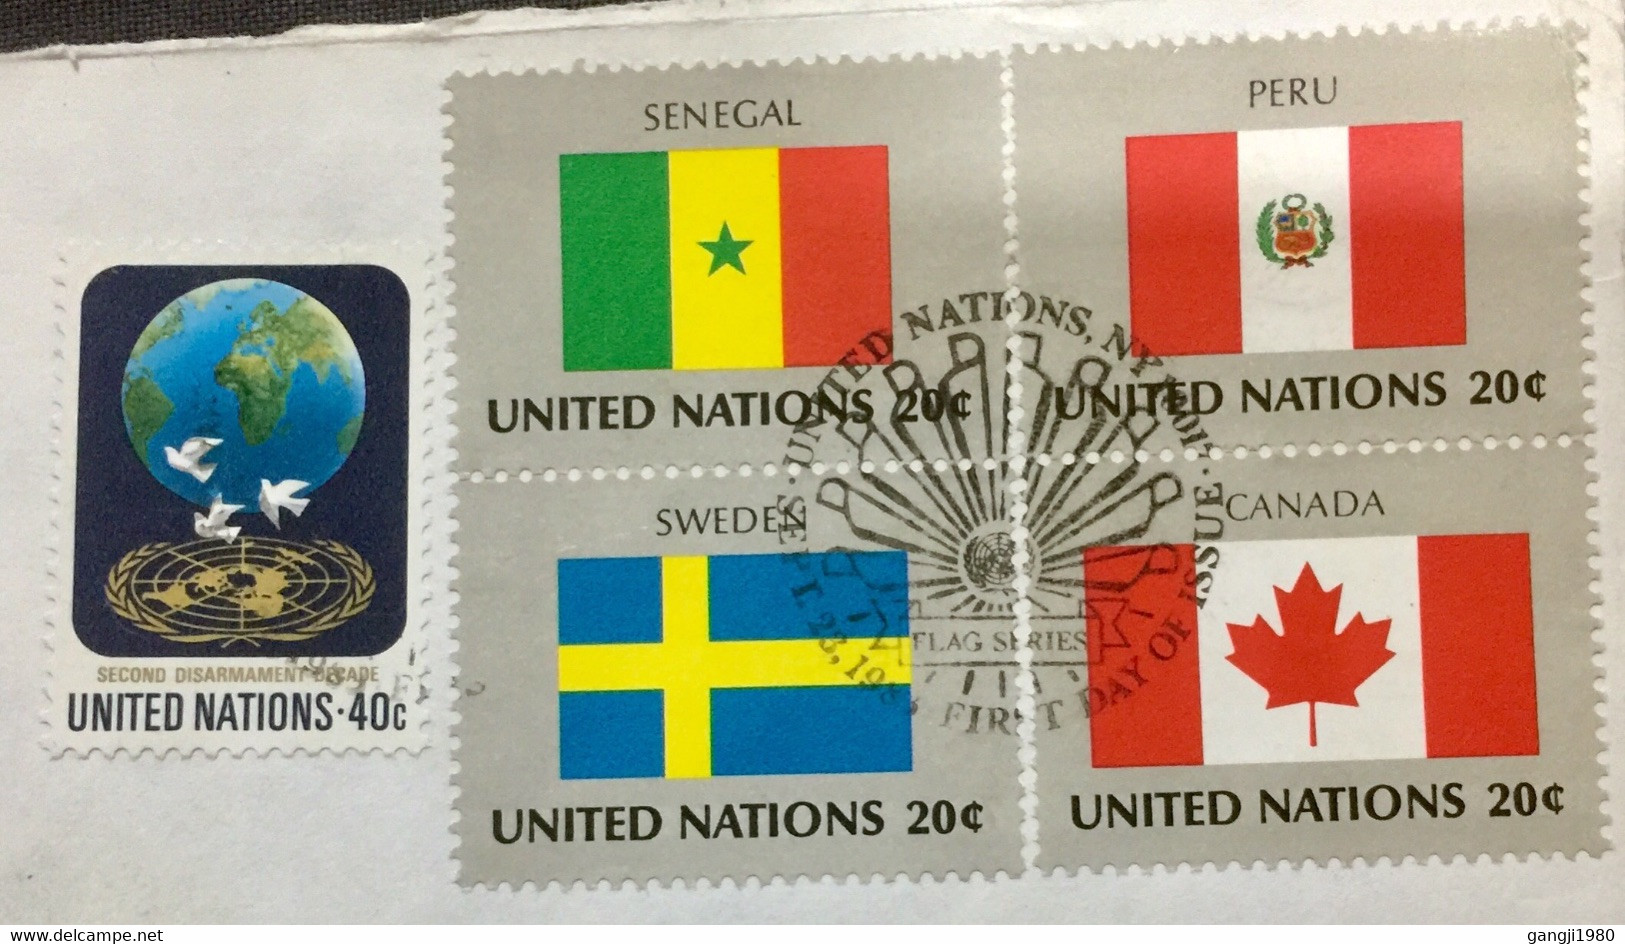 UNITED NATION 2003, FRONT ONLY WITH 5 DIFFERENT STAMPS USED TO SCOTLAND FLAG OF SENEGAL, PERU ,SWEDEN,CANADA COUNTRIES, - Covers & Documents